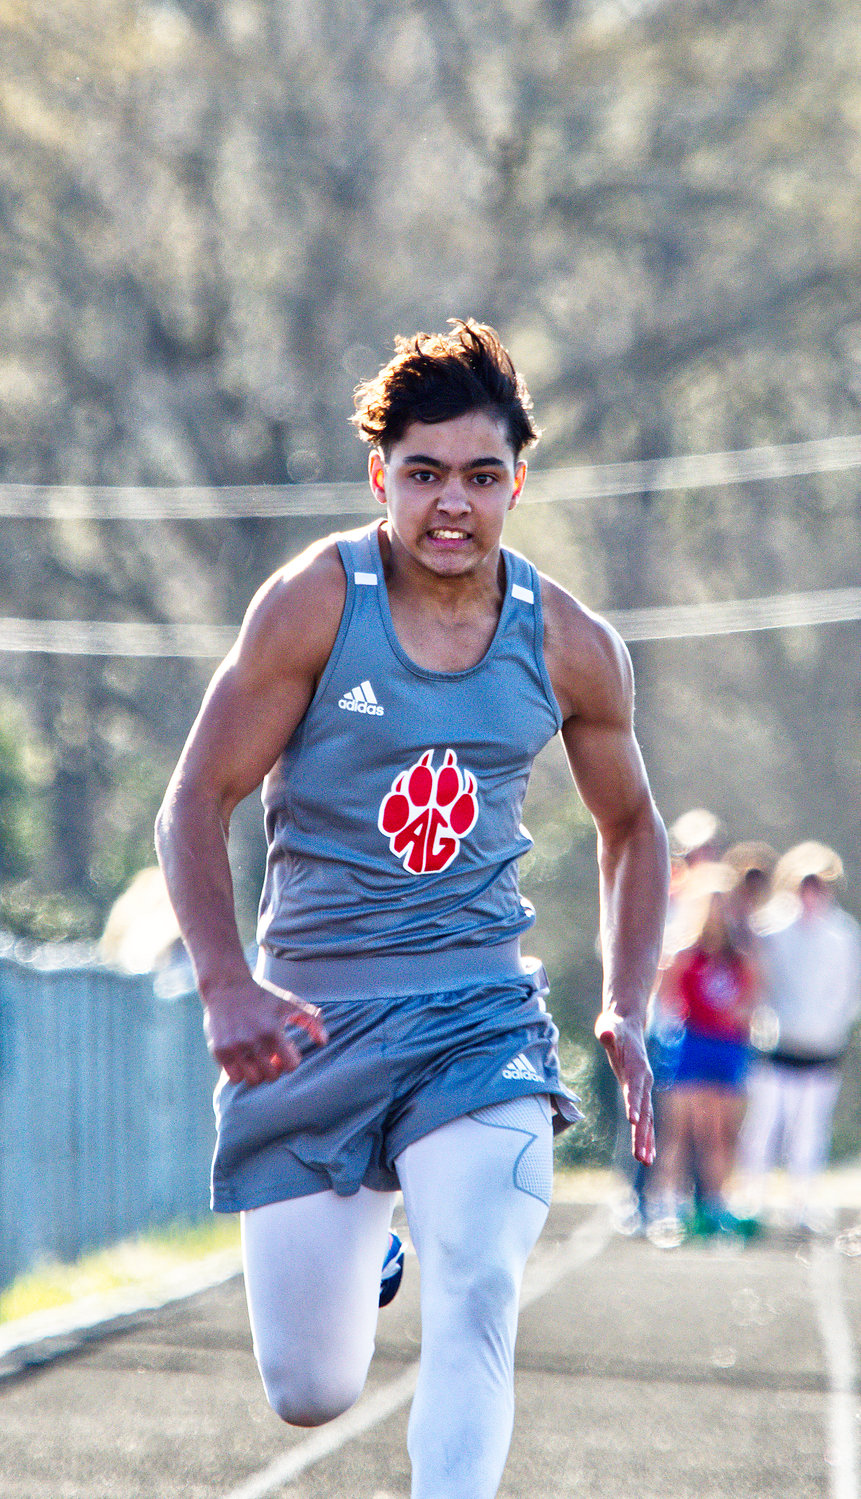 Jake Hallman runs the 100m dash at Alba-Golden's home meet held March 25. He will run the race in Austin at the UIL state track and field meet May 13.